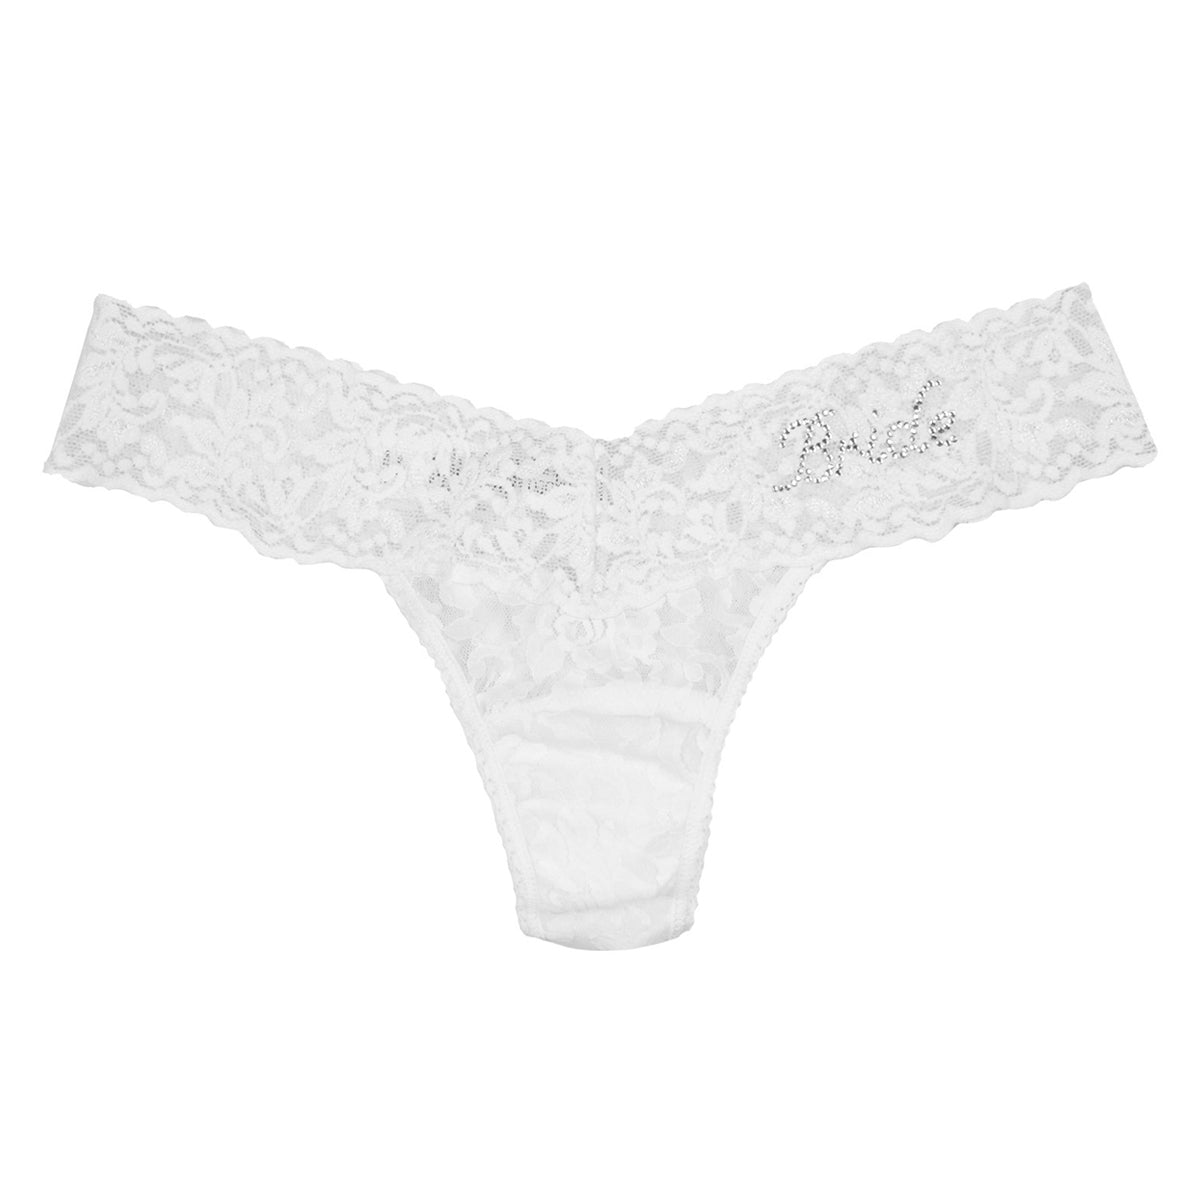 Mrs. Low Rise Thong in White-Blue Crystals